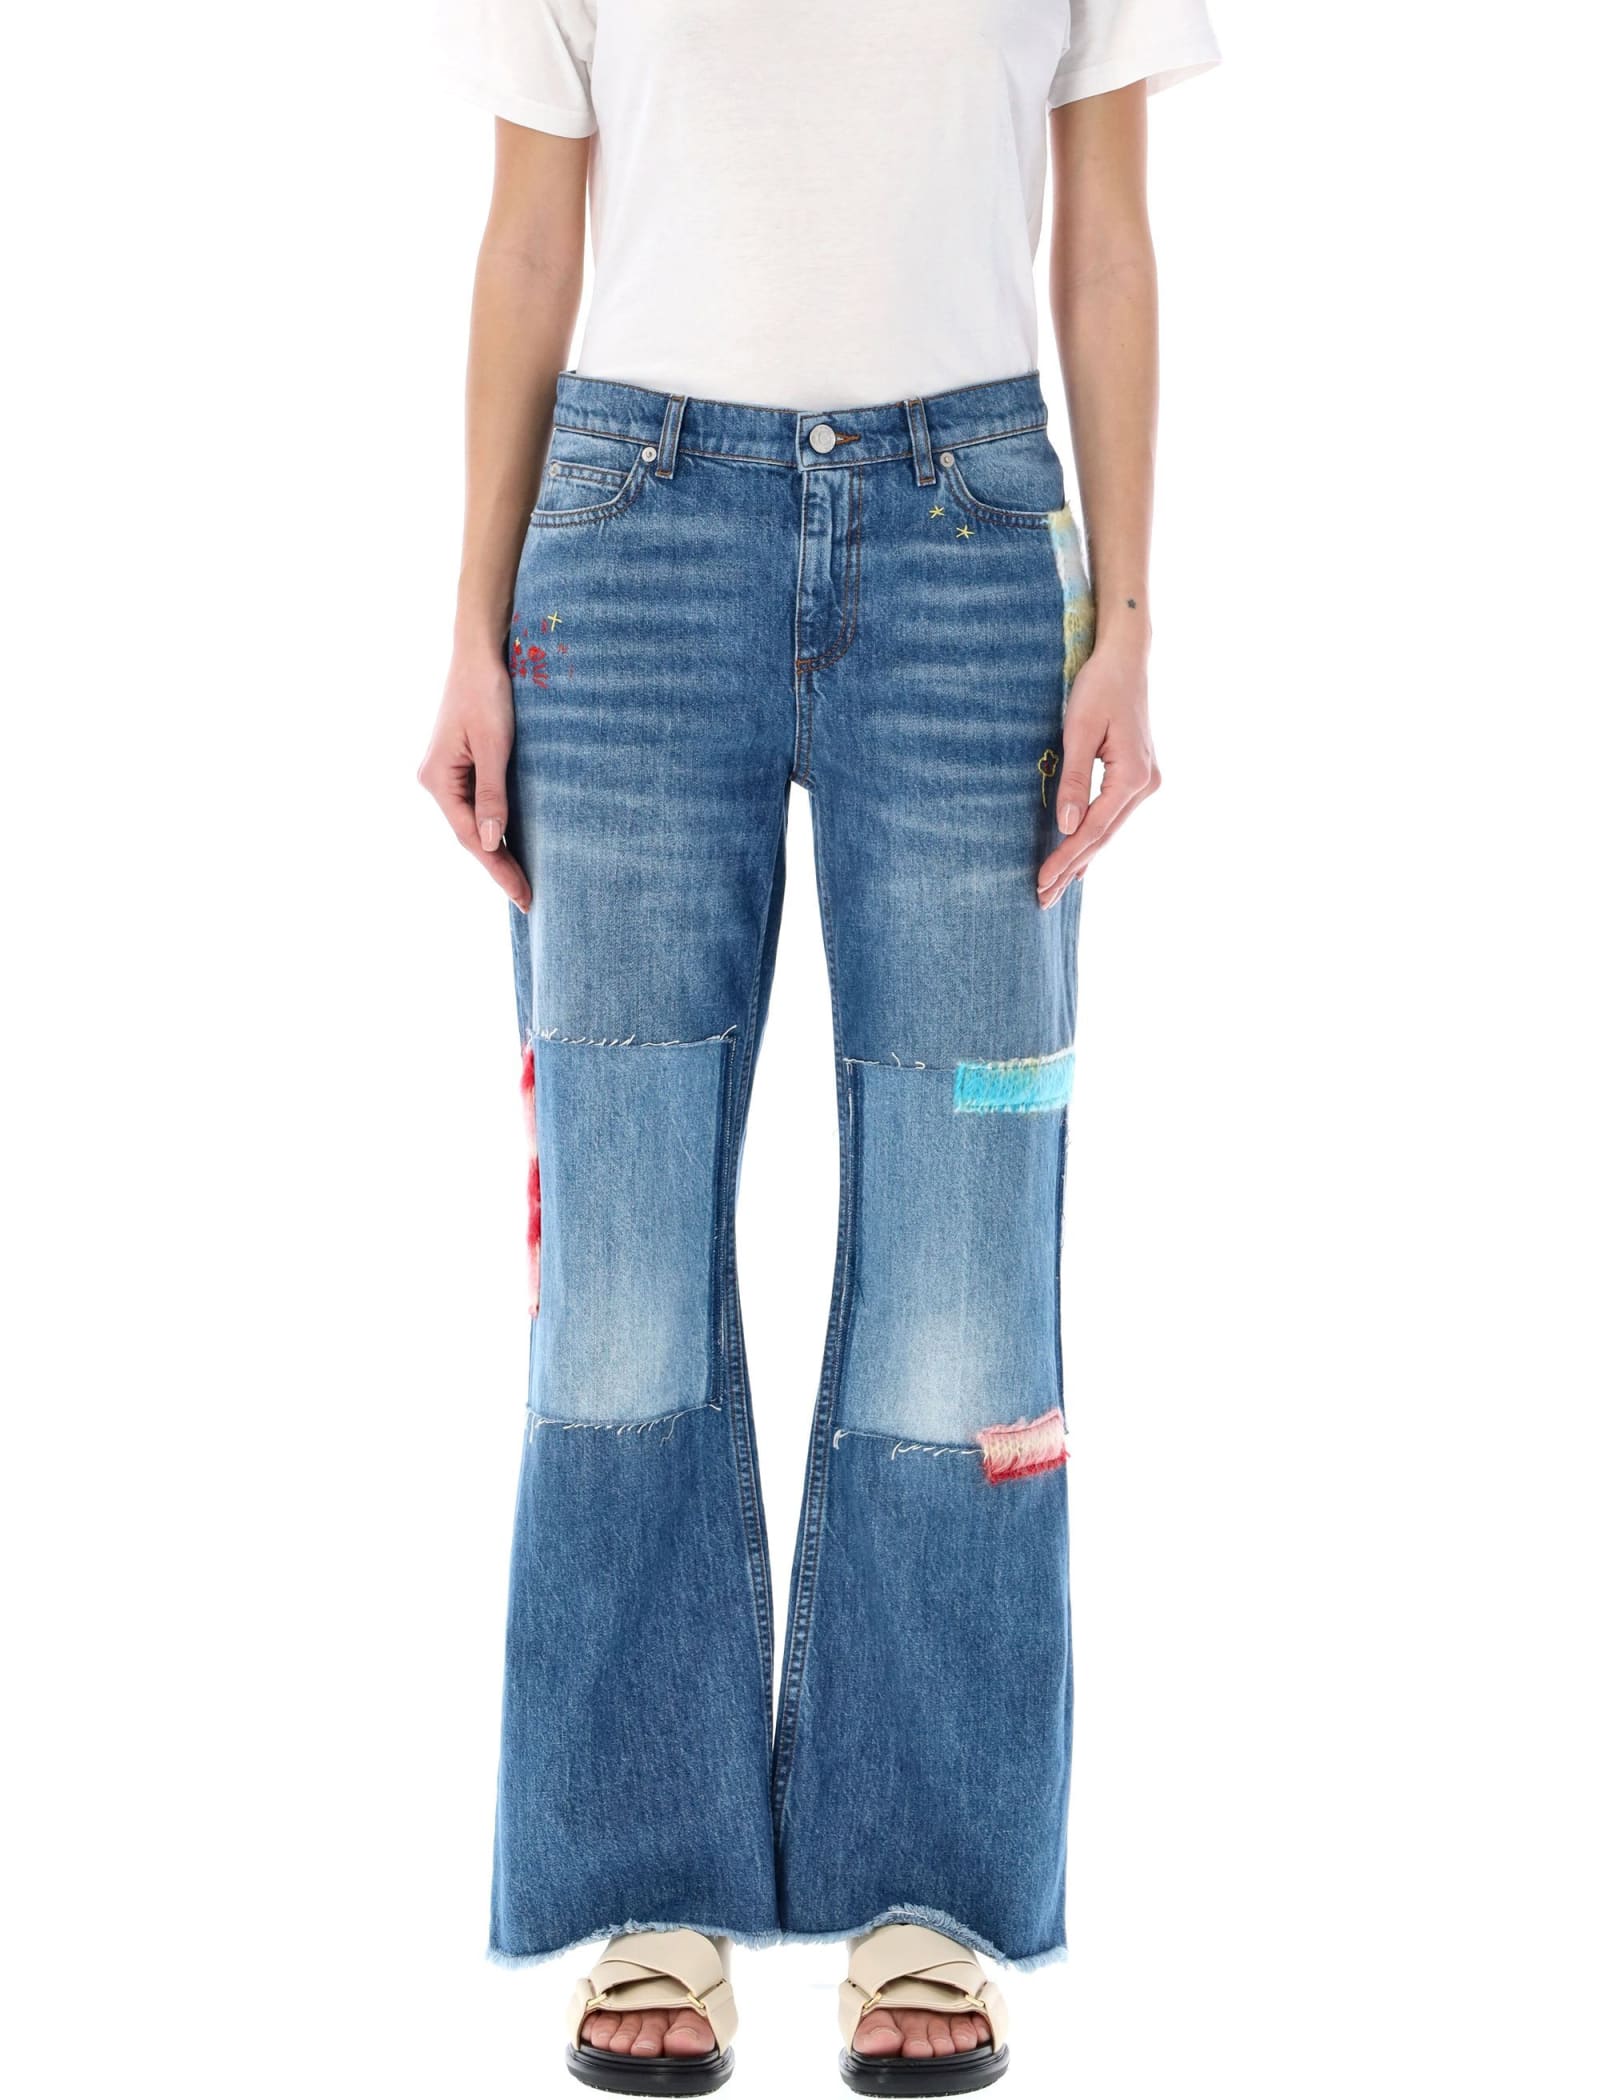 MARNI MOHAIR PATCHES JEANS